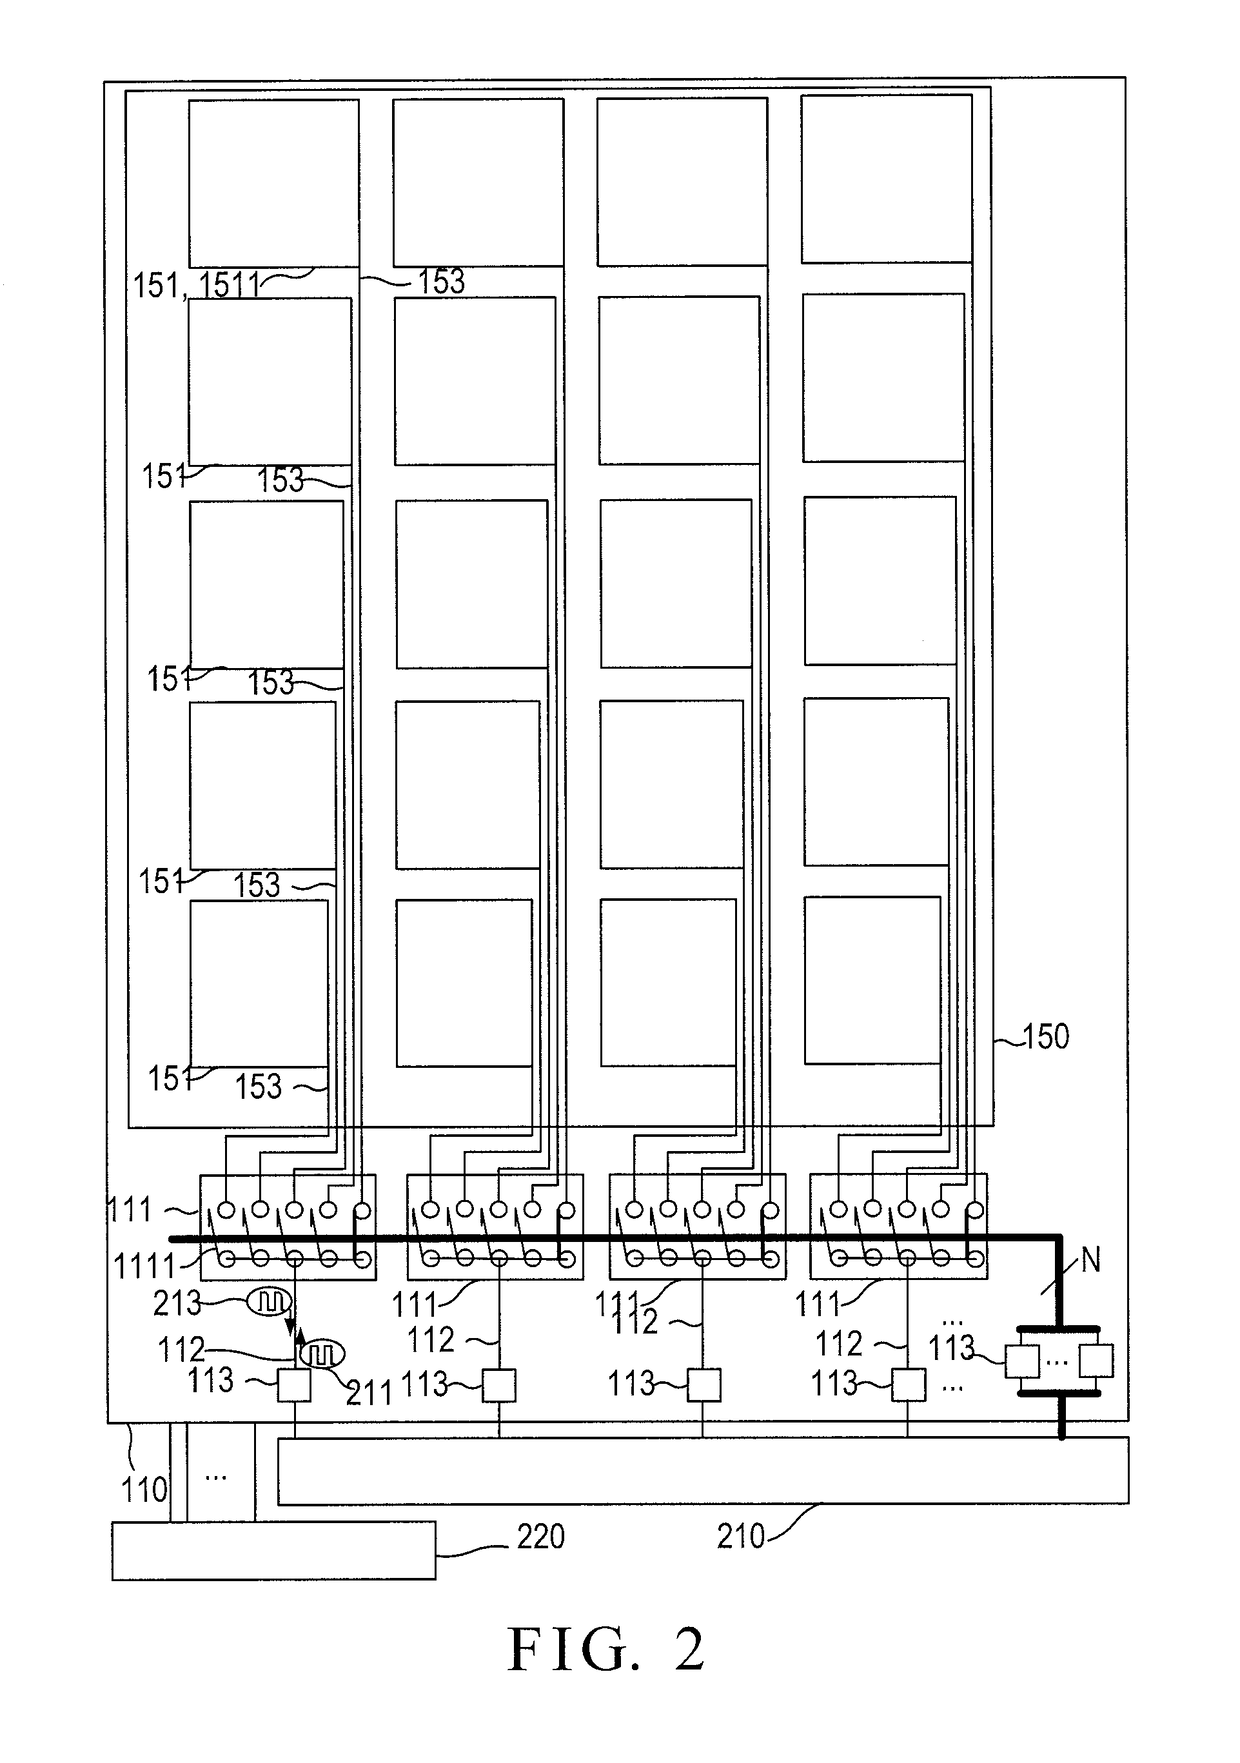 OLED touch display device